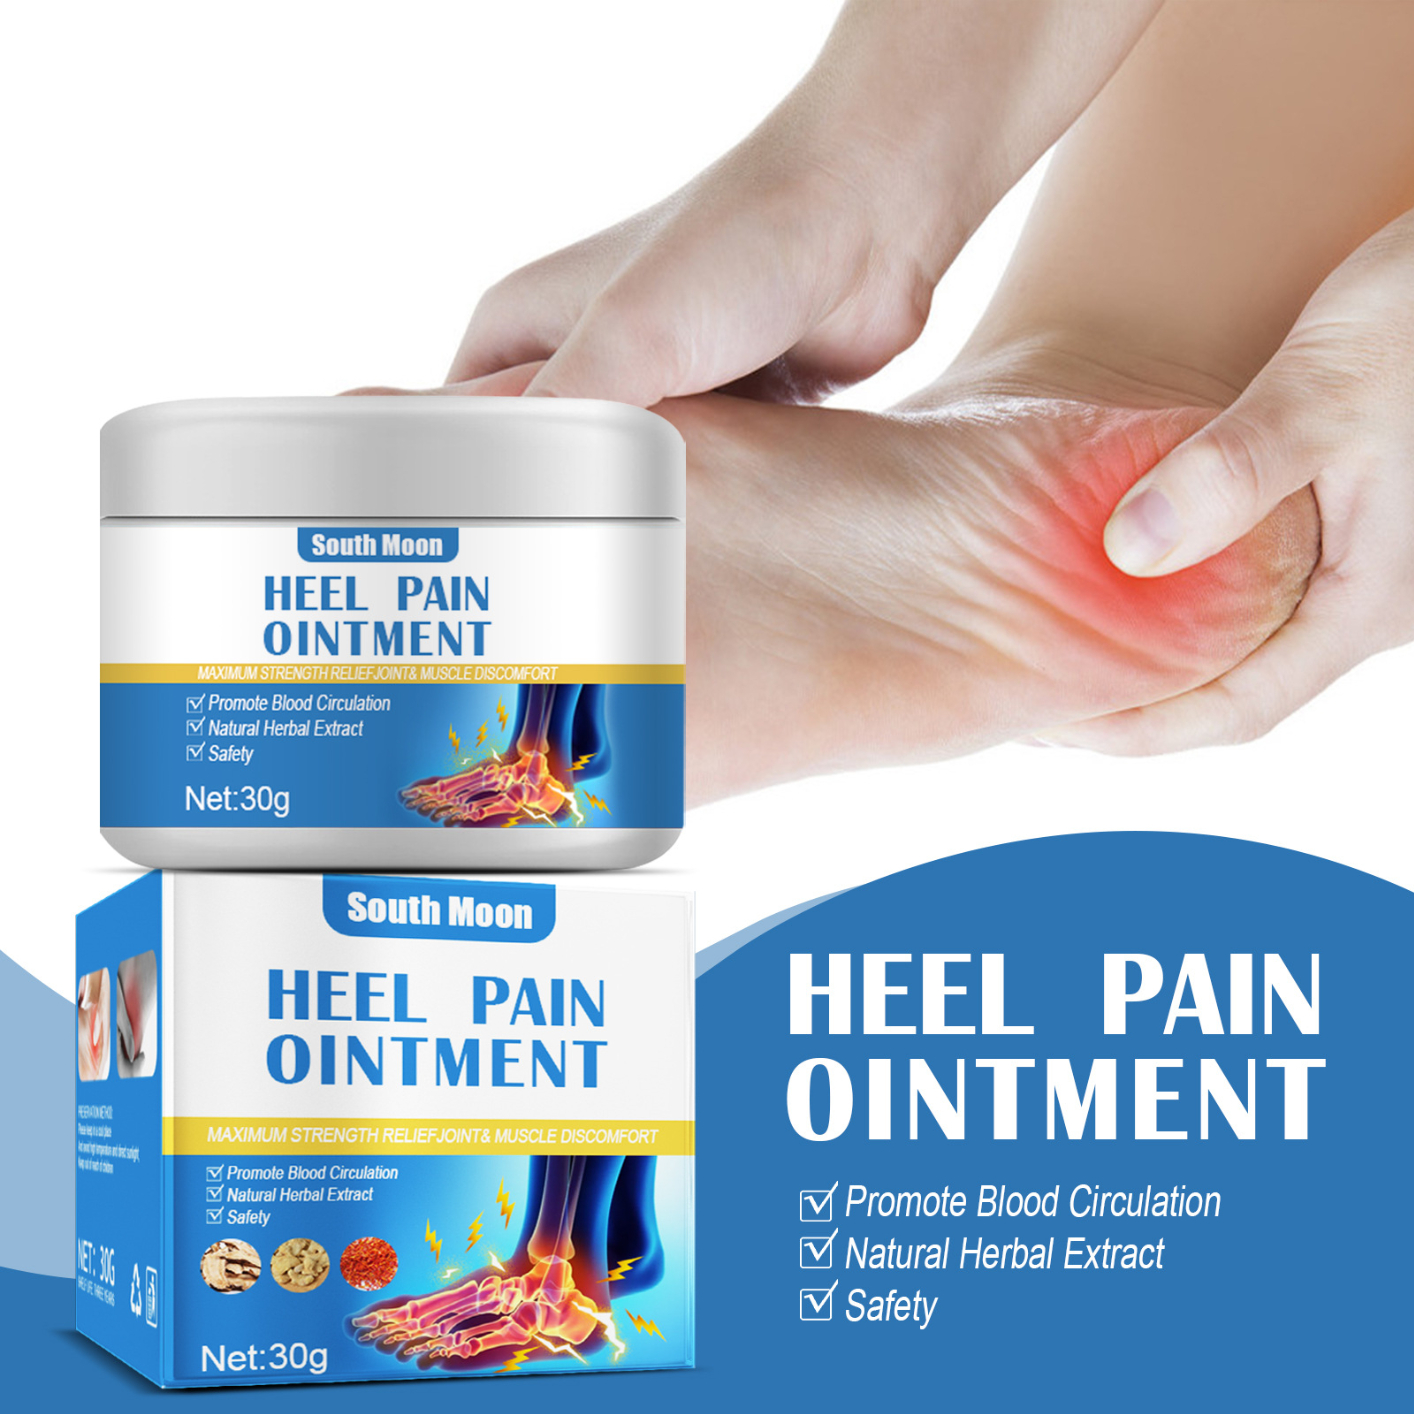 Pain & Inflammation Fast Relief Cream for Plantar Fasciitis, Heel Spurs, Shin Splints, Achille's Injuries and Morton's Neuroma